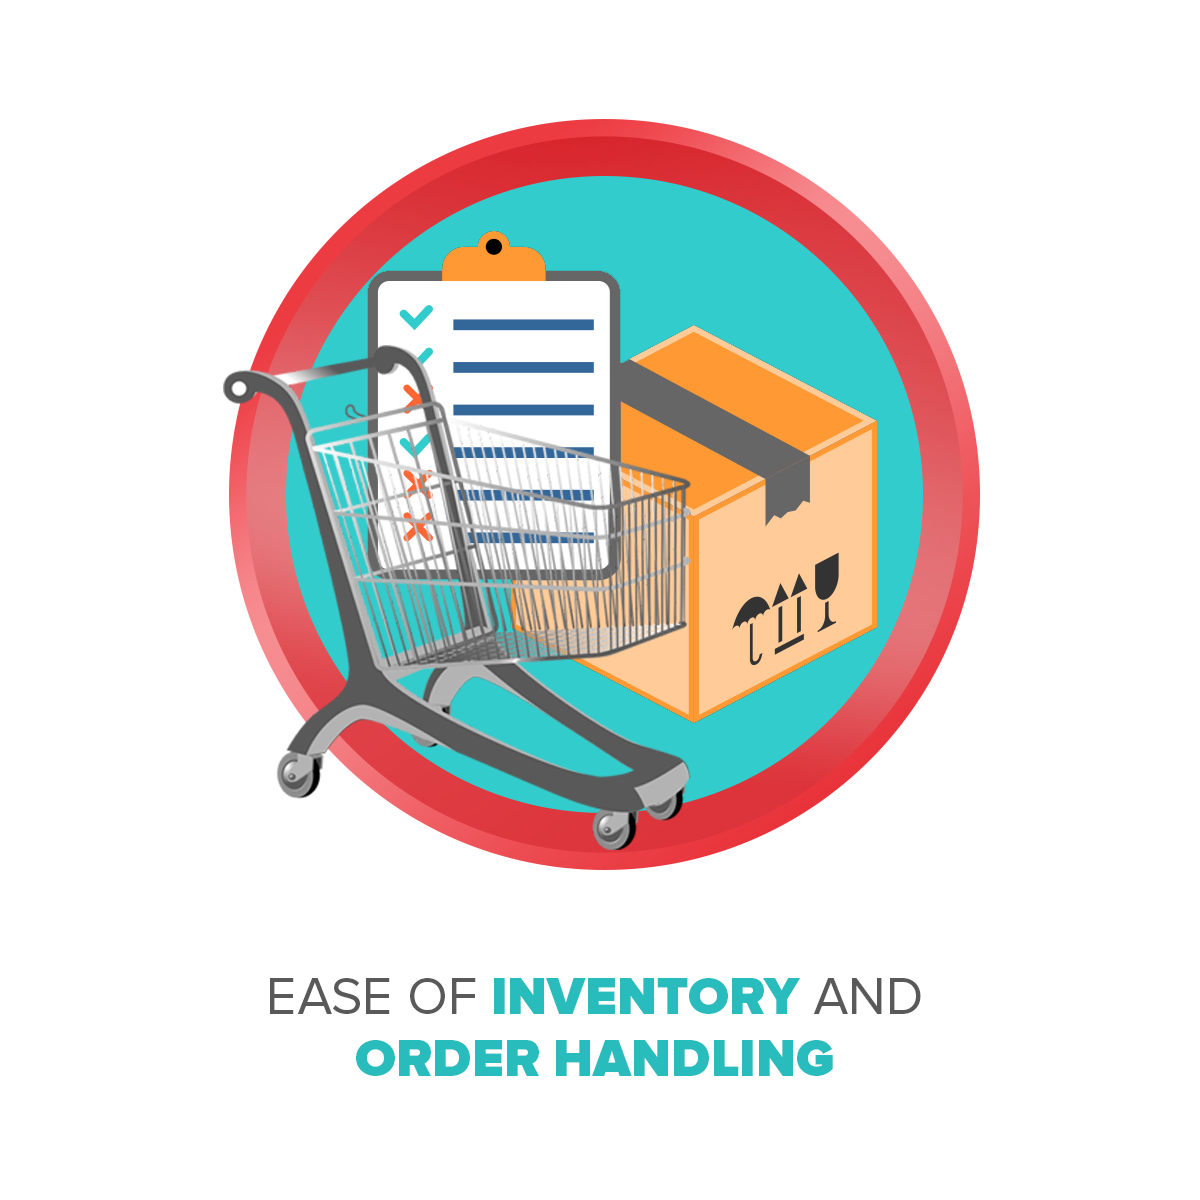 Ease of inventory and order handling